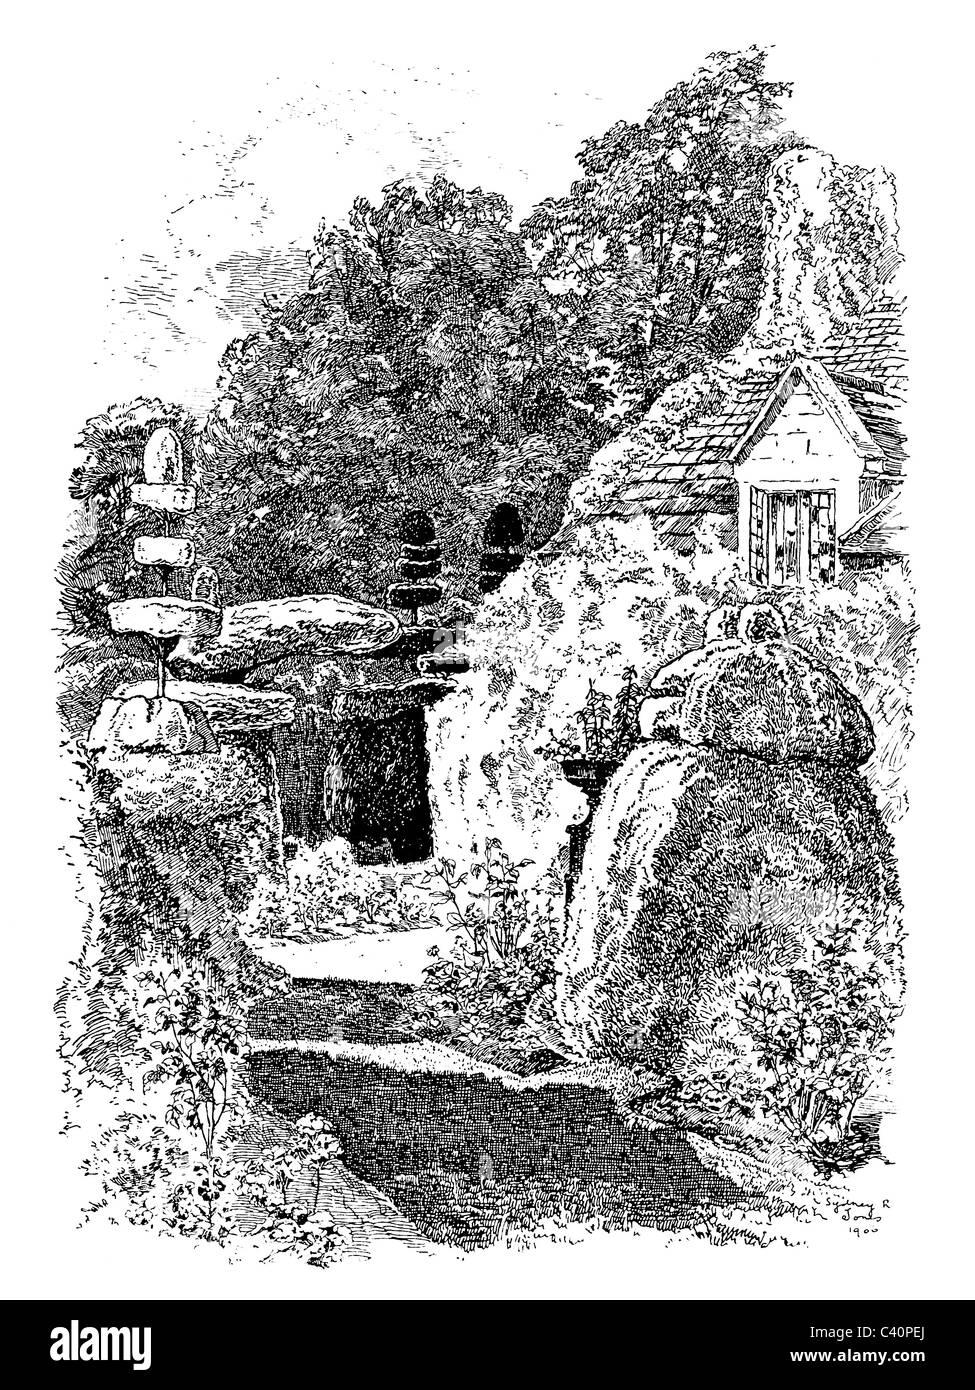 Haddon, Derbyshire - pen and ink illustration from 'Old English Country Cottages' by Charles Holme, 1906 Stock Photo